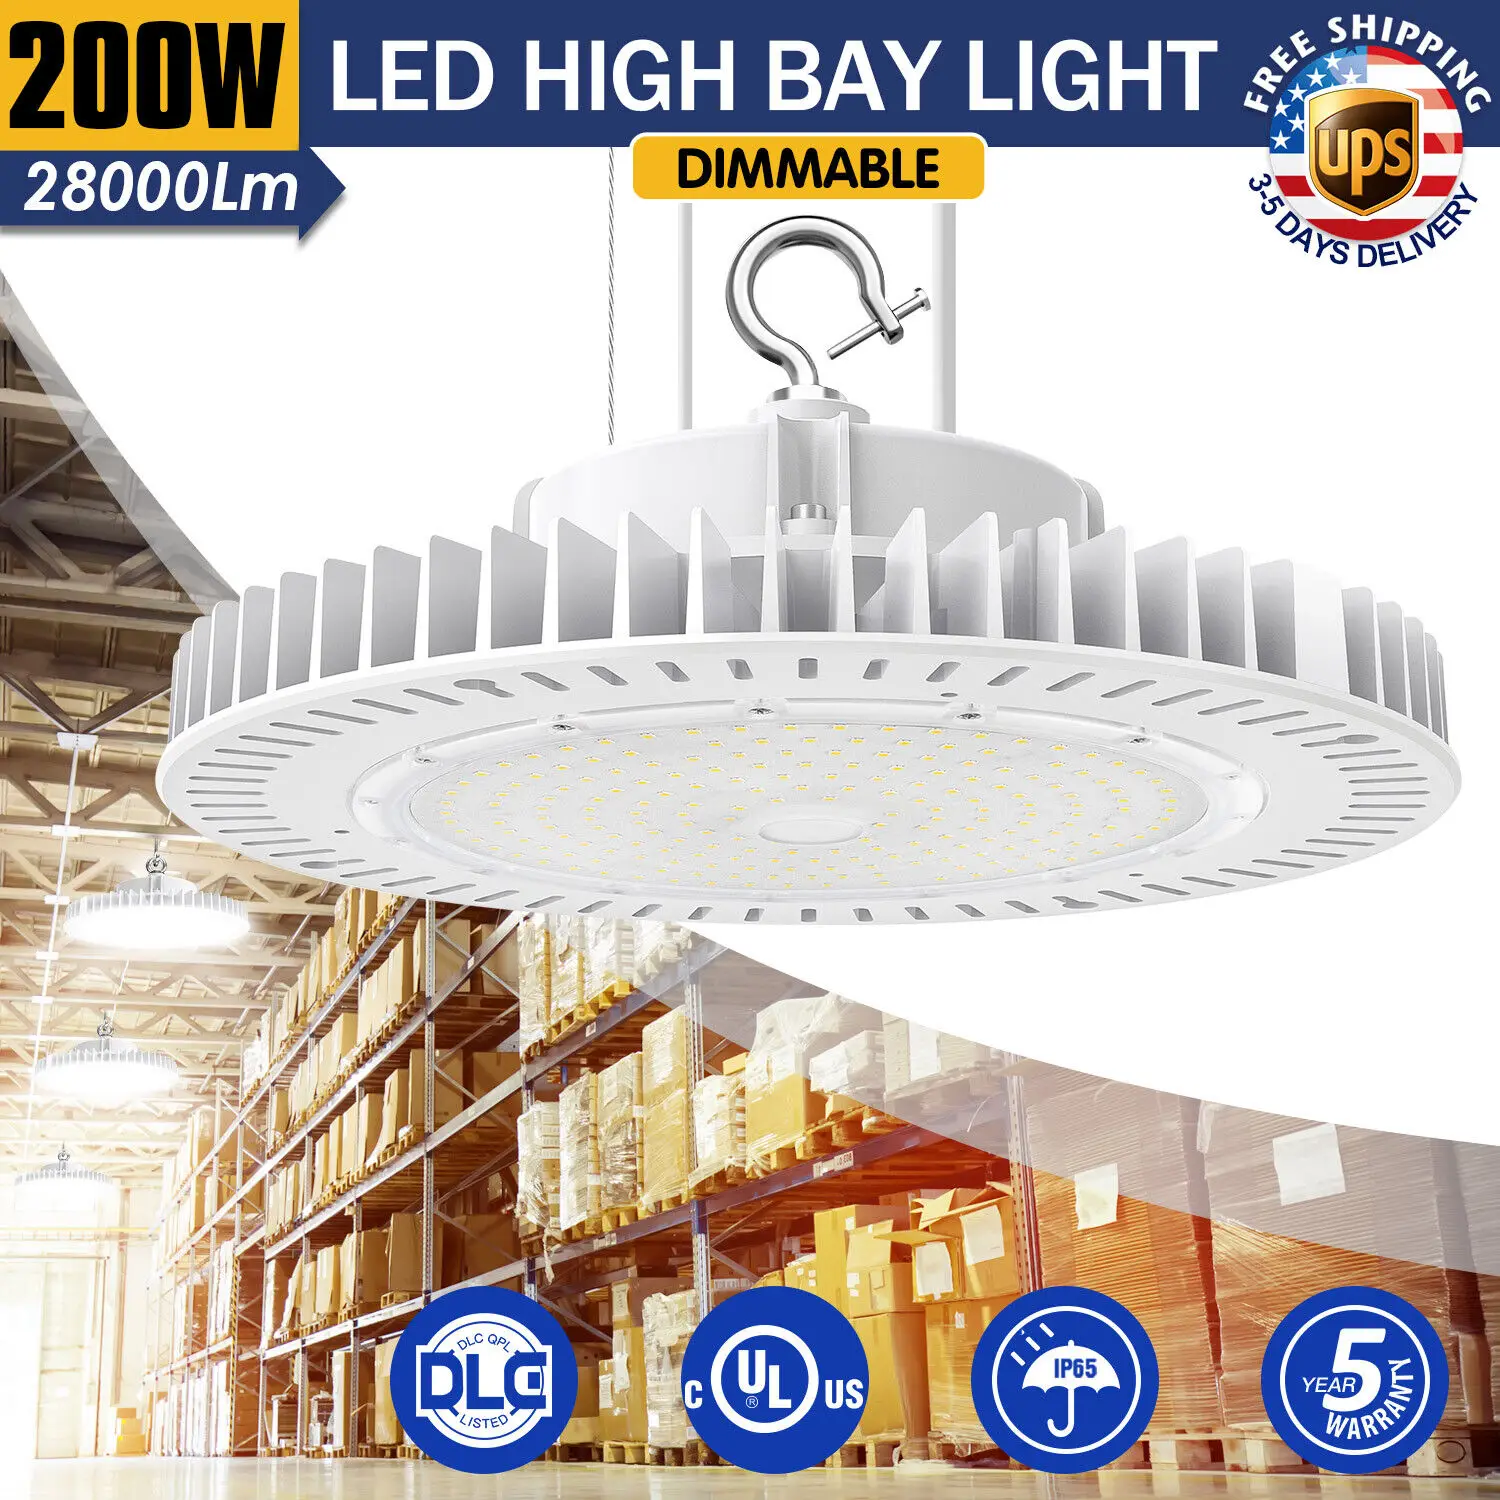 200W High Bay LED Light AC100-277V 28,000LM(150Lm/w) UFO Lighting Fixture 0-10V Dimmable 5000K Daylight IP65 UL Listed 6ft Cable